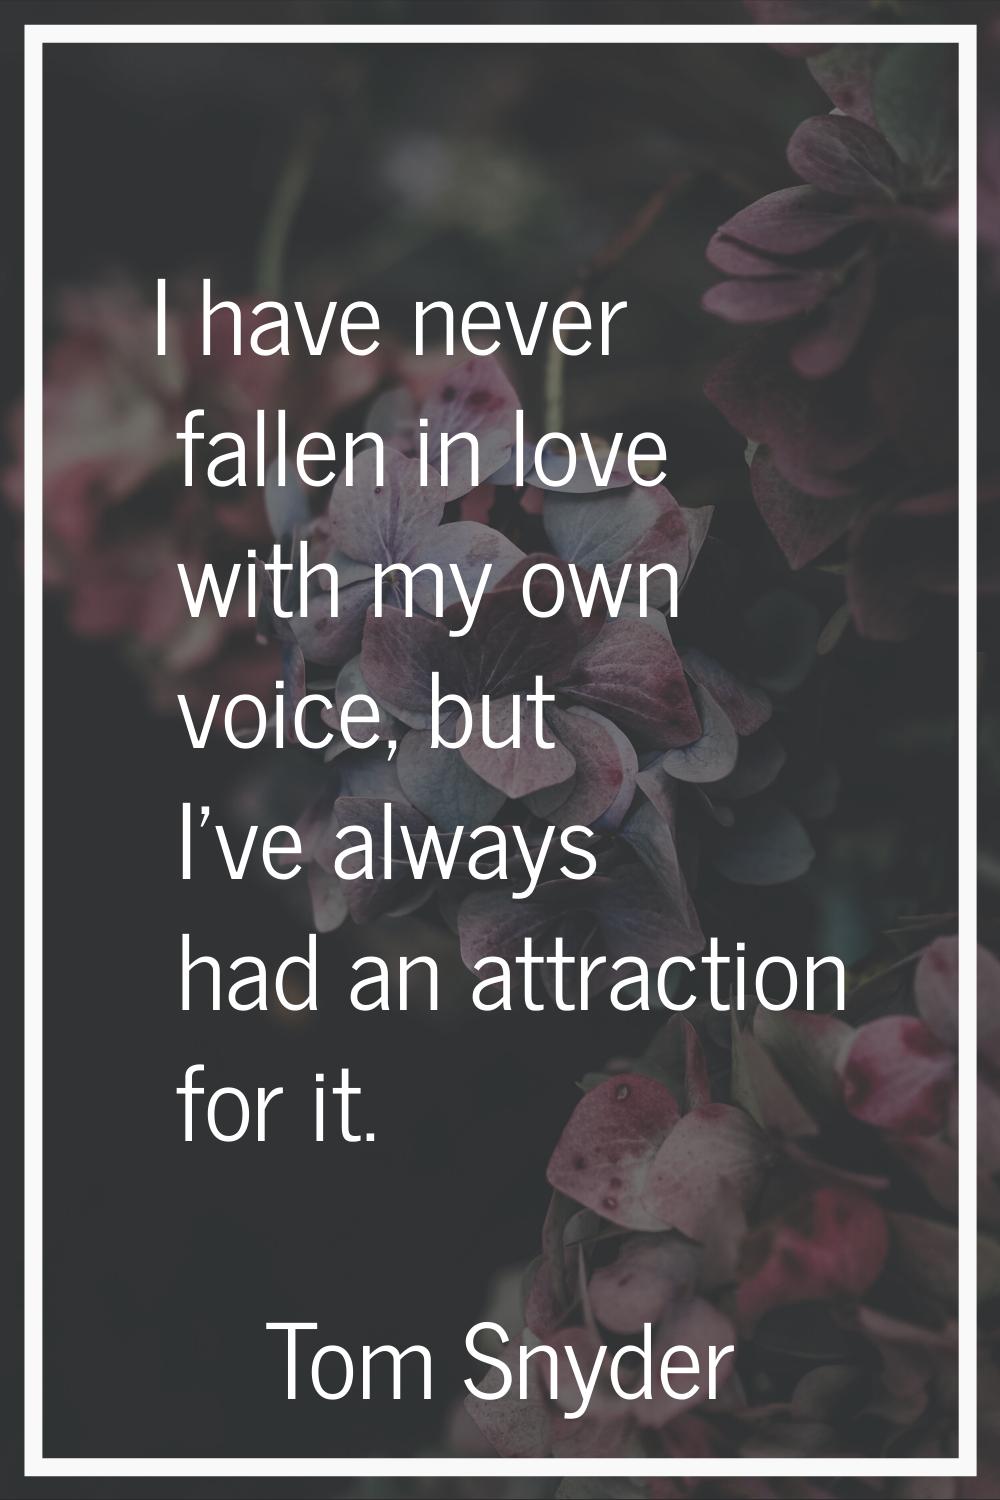 I have never fallen in love with my own voice, but I've always had an attraction for it.